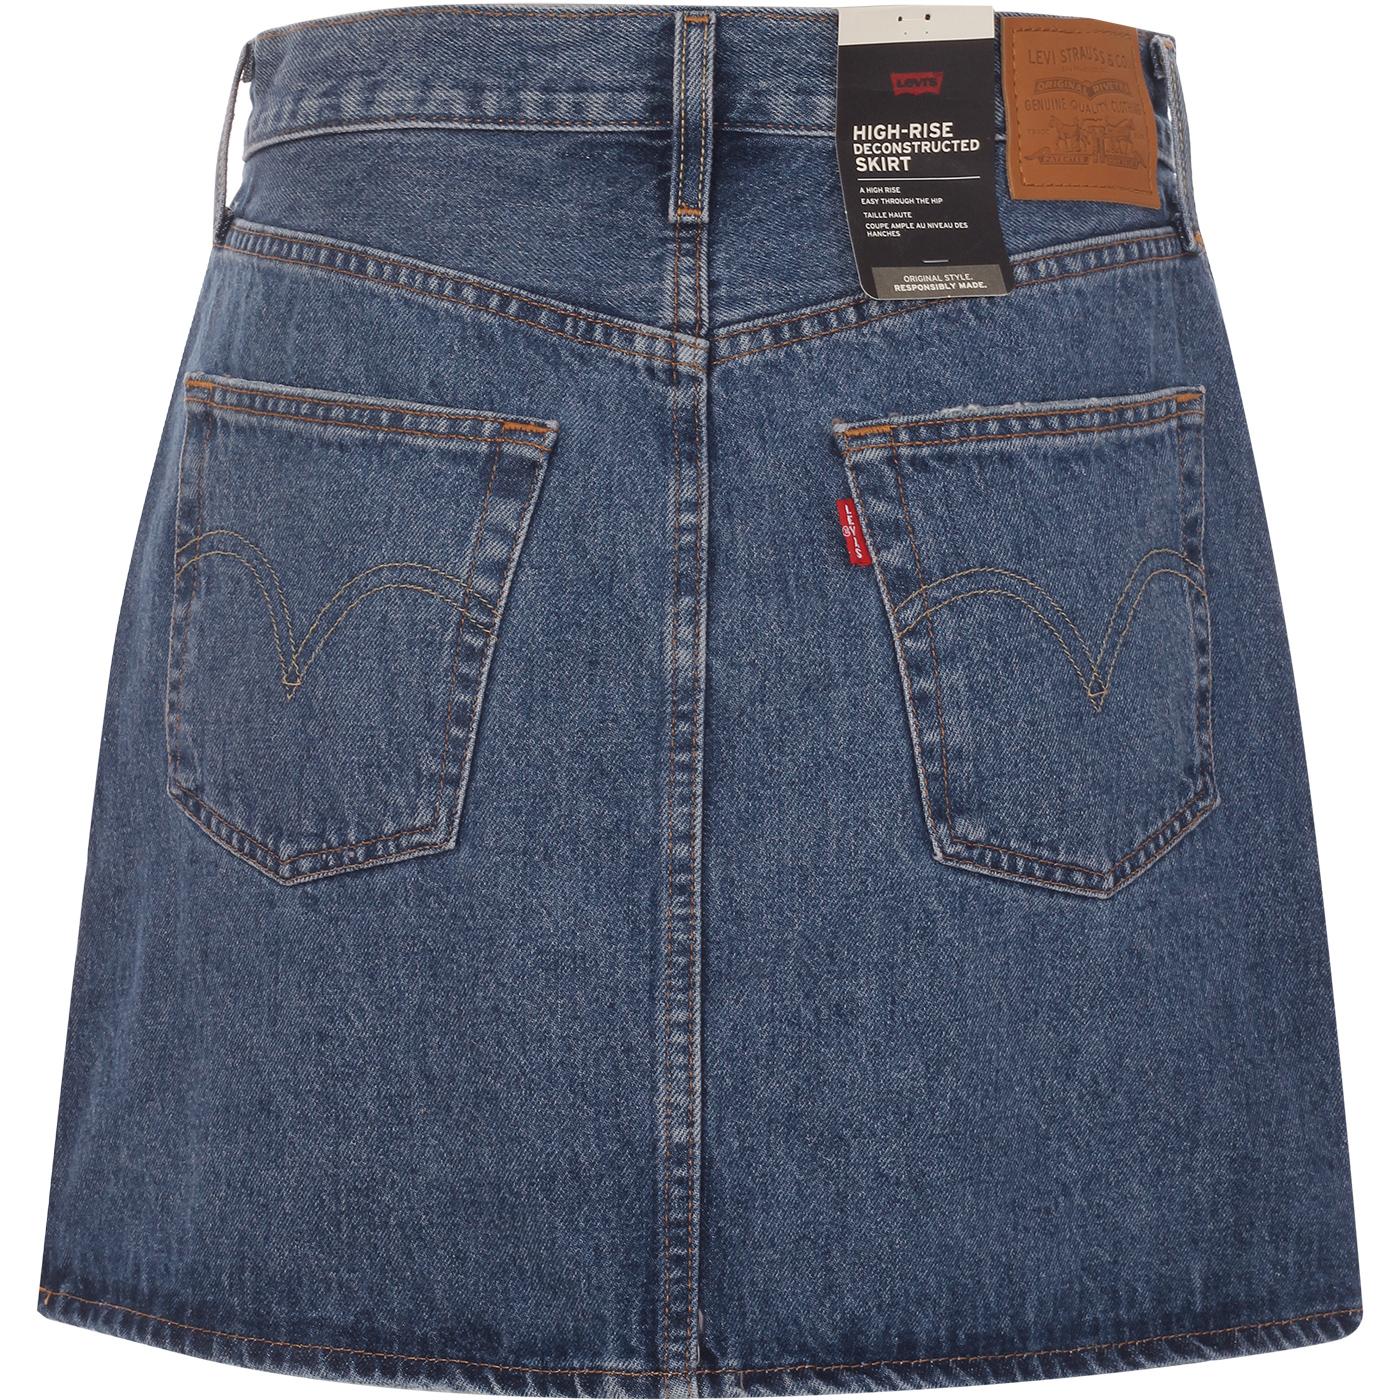 LEVI'S High Rise Deconstructed Button Fly Denim Skirt Troy Tricks